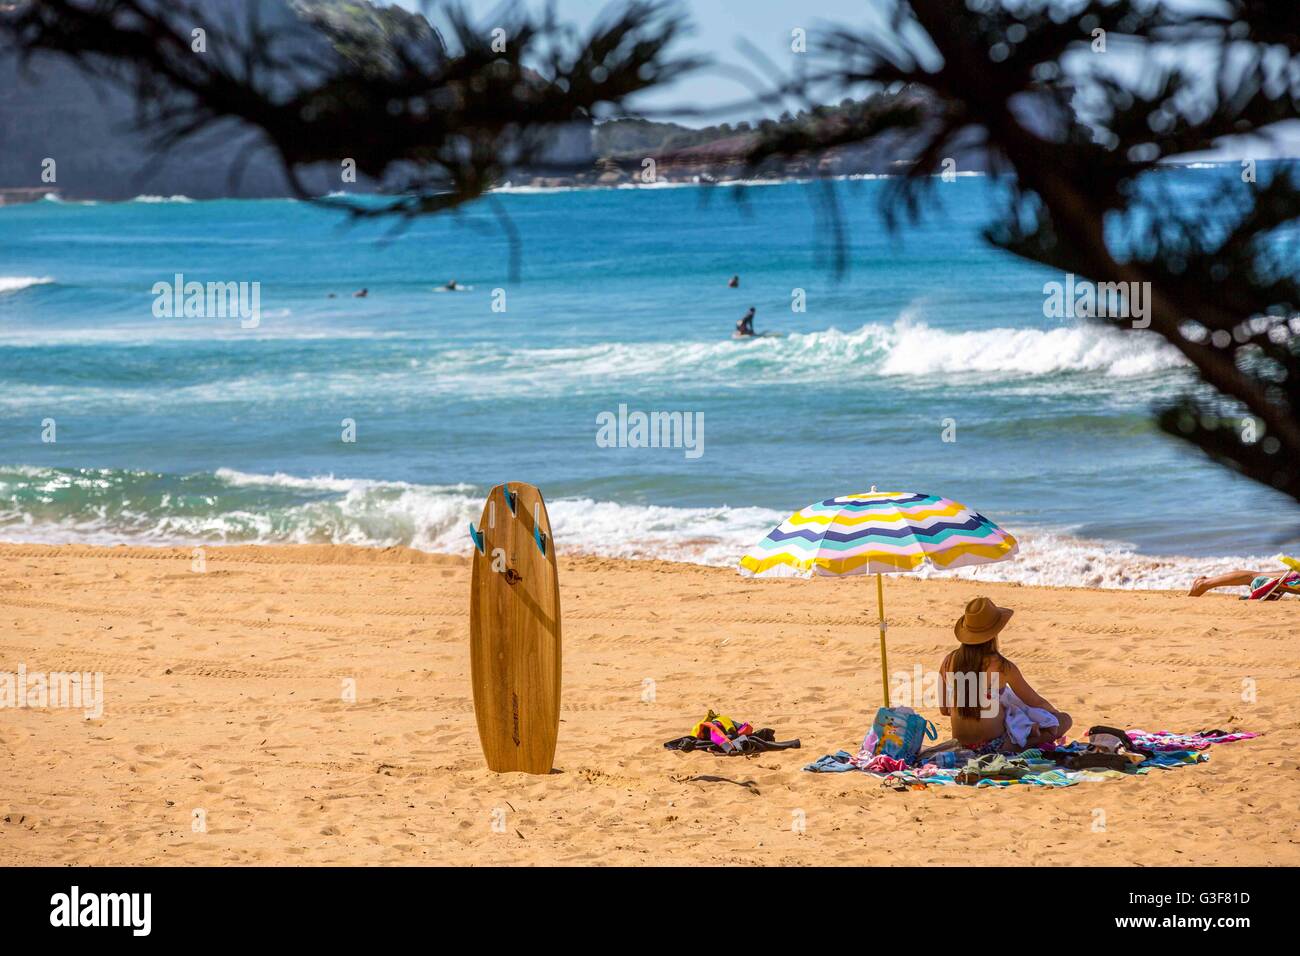 Avoca Beach in NSW Australia when surfing is a passion. Stock Photo